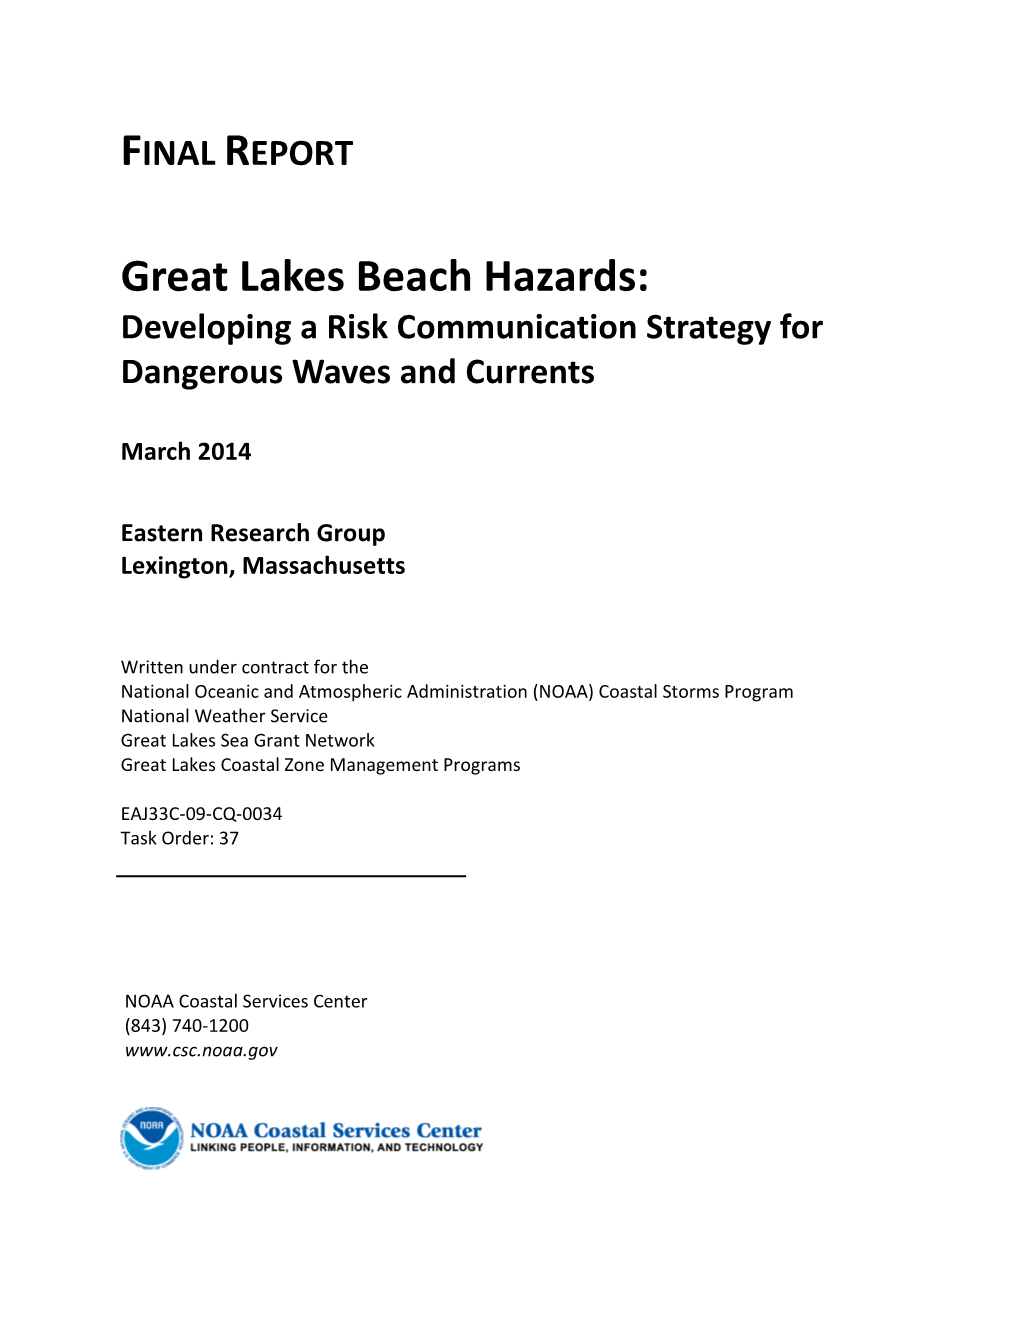 Great Lakes Beach Hazards: Developing a Risk Communication Strategy for Dangerous Waves and Currents